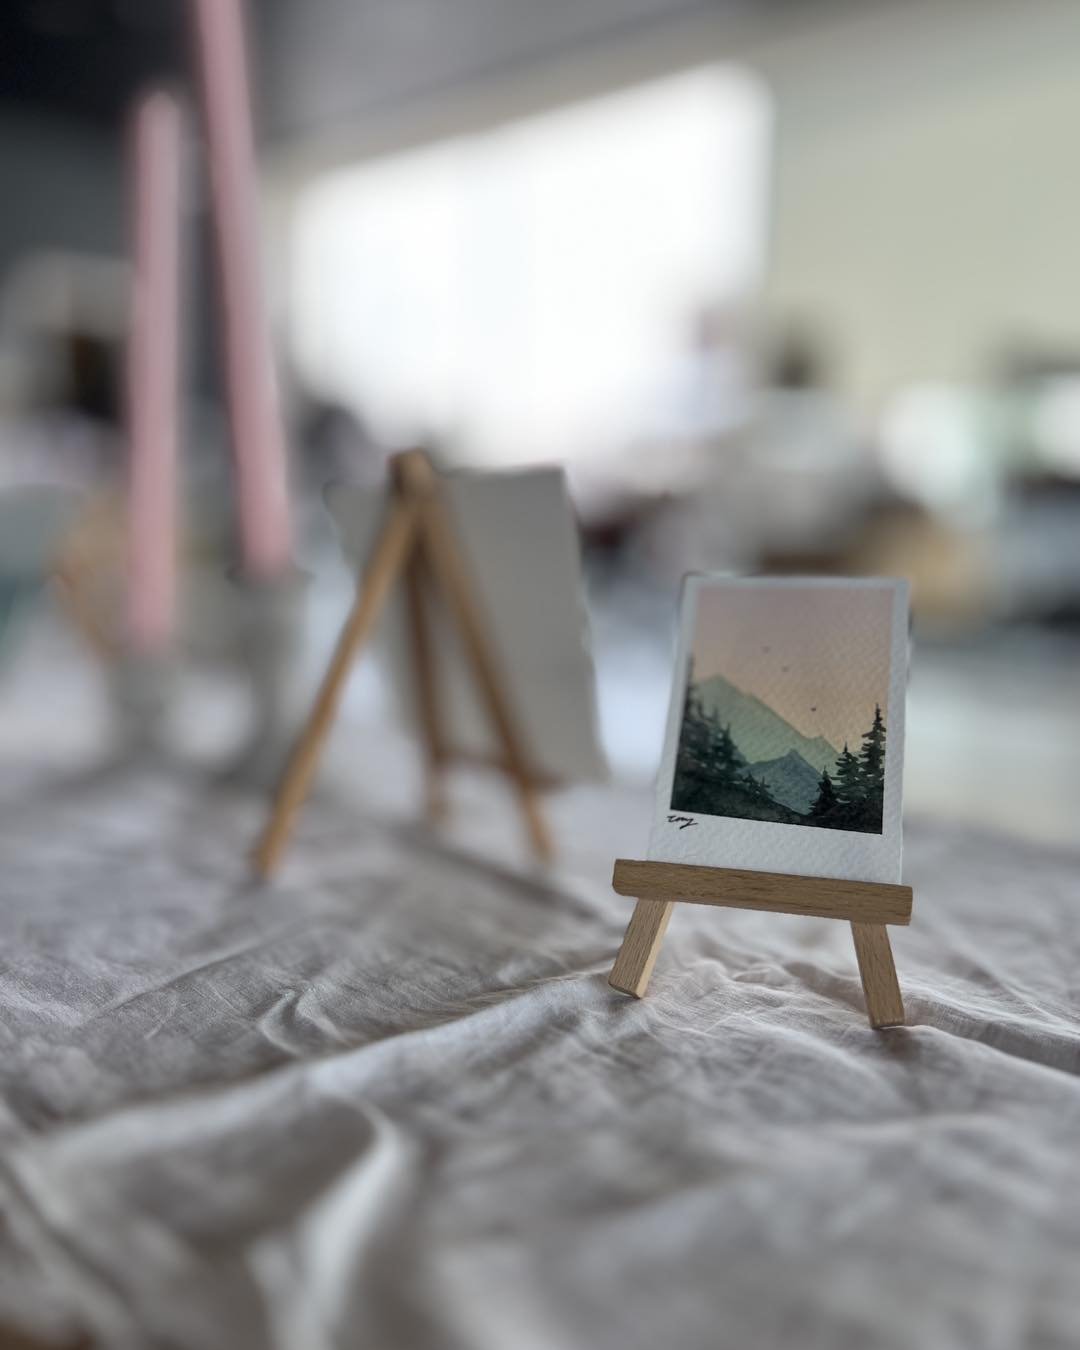 Watercolor classes by Streams Watercolor every month, and this month we have an extra event for Mother&rsquo;s Day! 
May 11th, sign up and come make some art with your loved ones (: